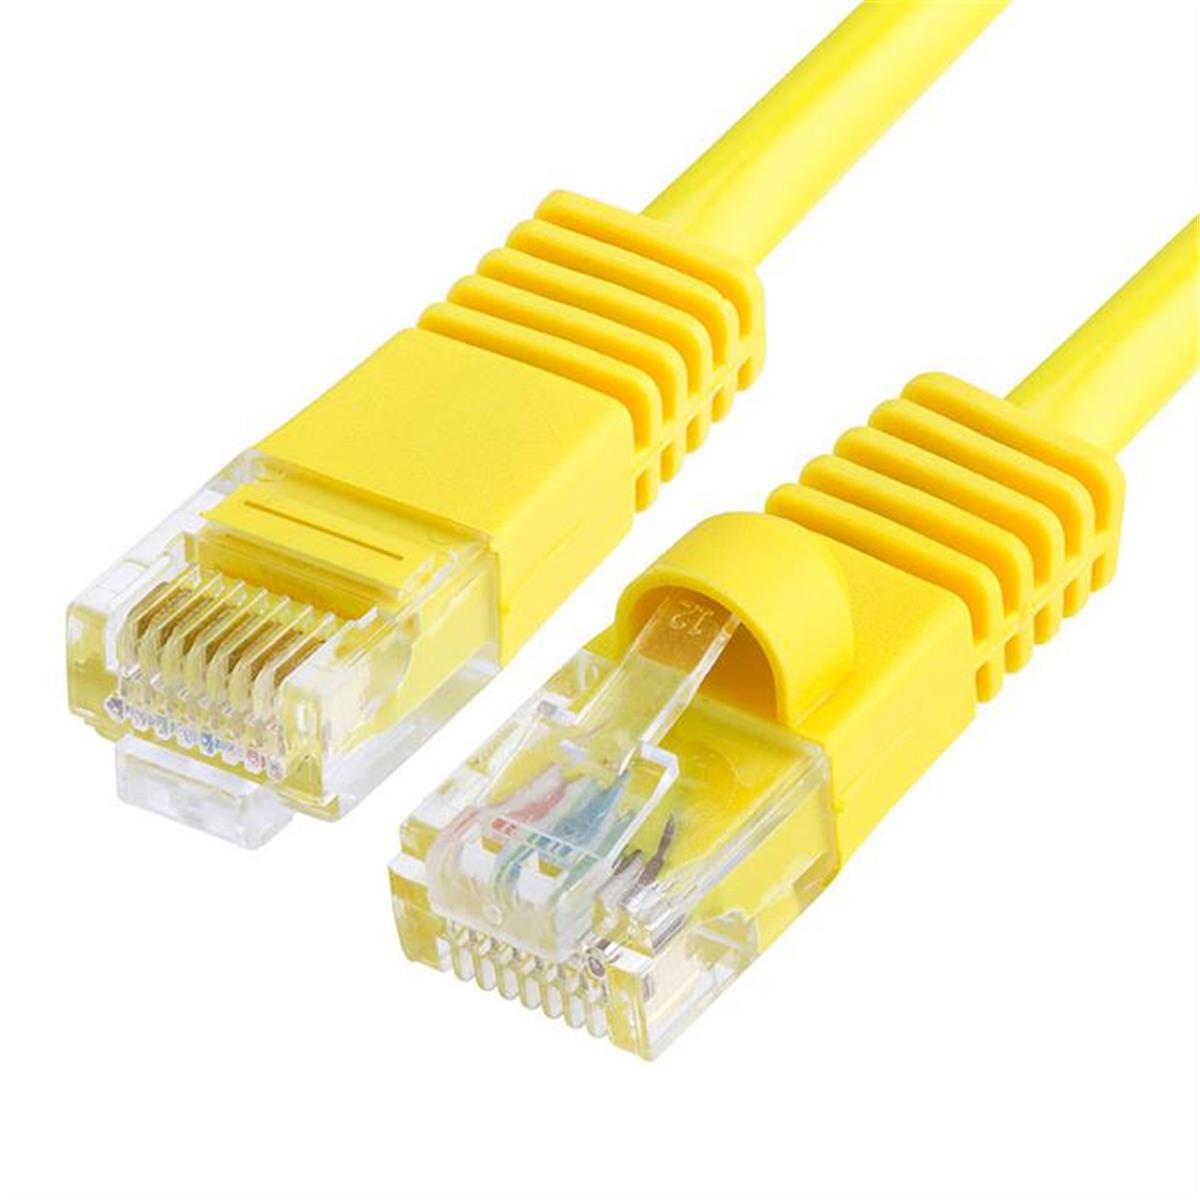 Picture of CMPLE 871-N 350 MHz RJ45 Cat5e Ethernet Network Patch Cable - 3 ft. - Yellow